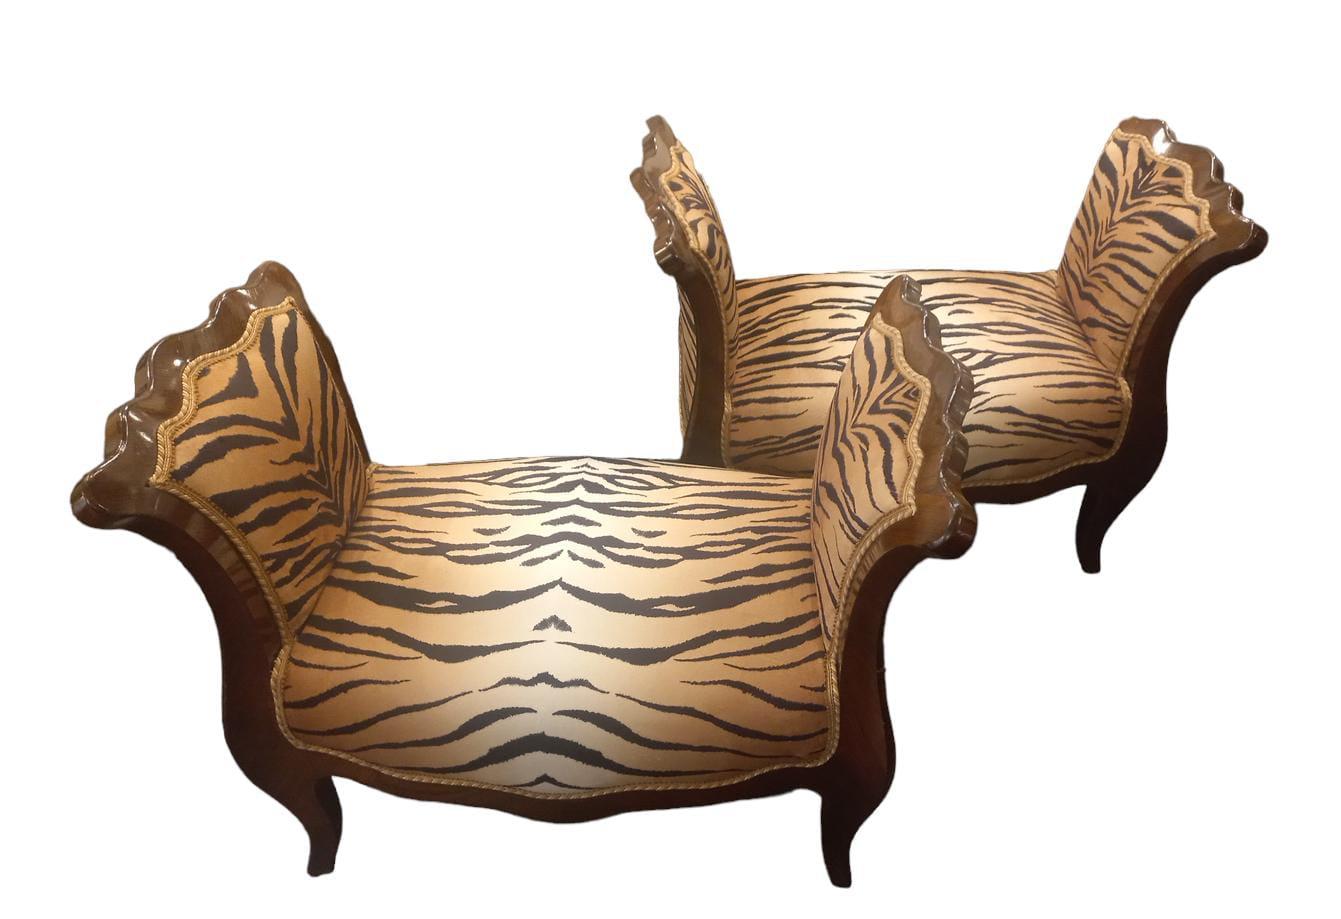 Pair of herringbone-paneled wooden benches, French cabinetry from the second half of the 19th century, new animalier velvet upholstery and padding, seat height 36 cm, total height 60 cm, maximum footprint 79x45 cm.